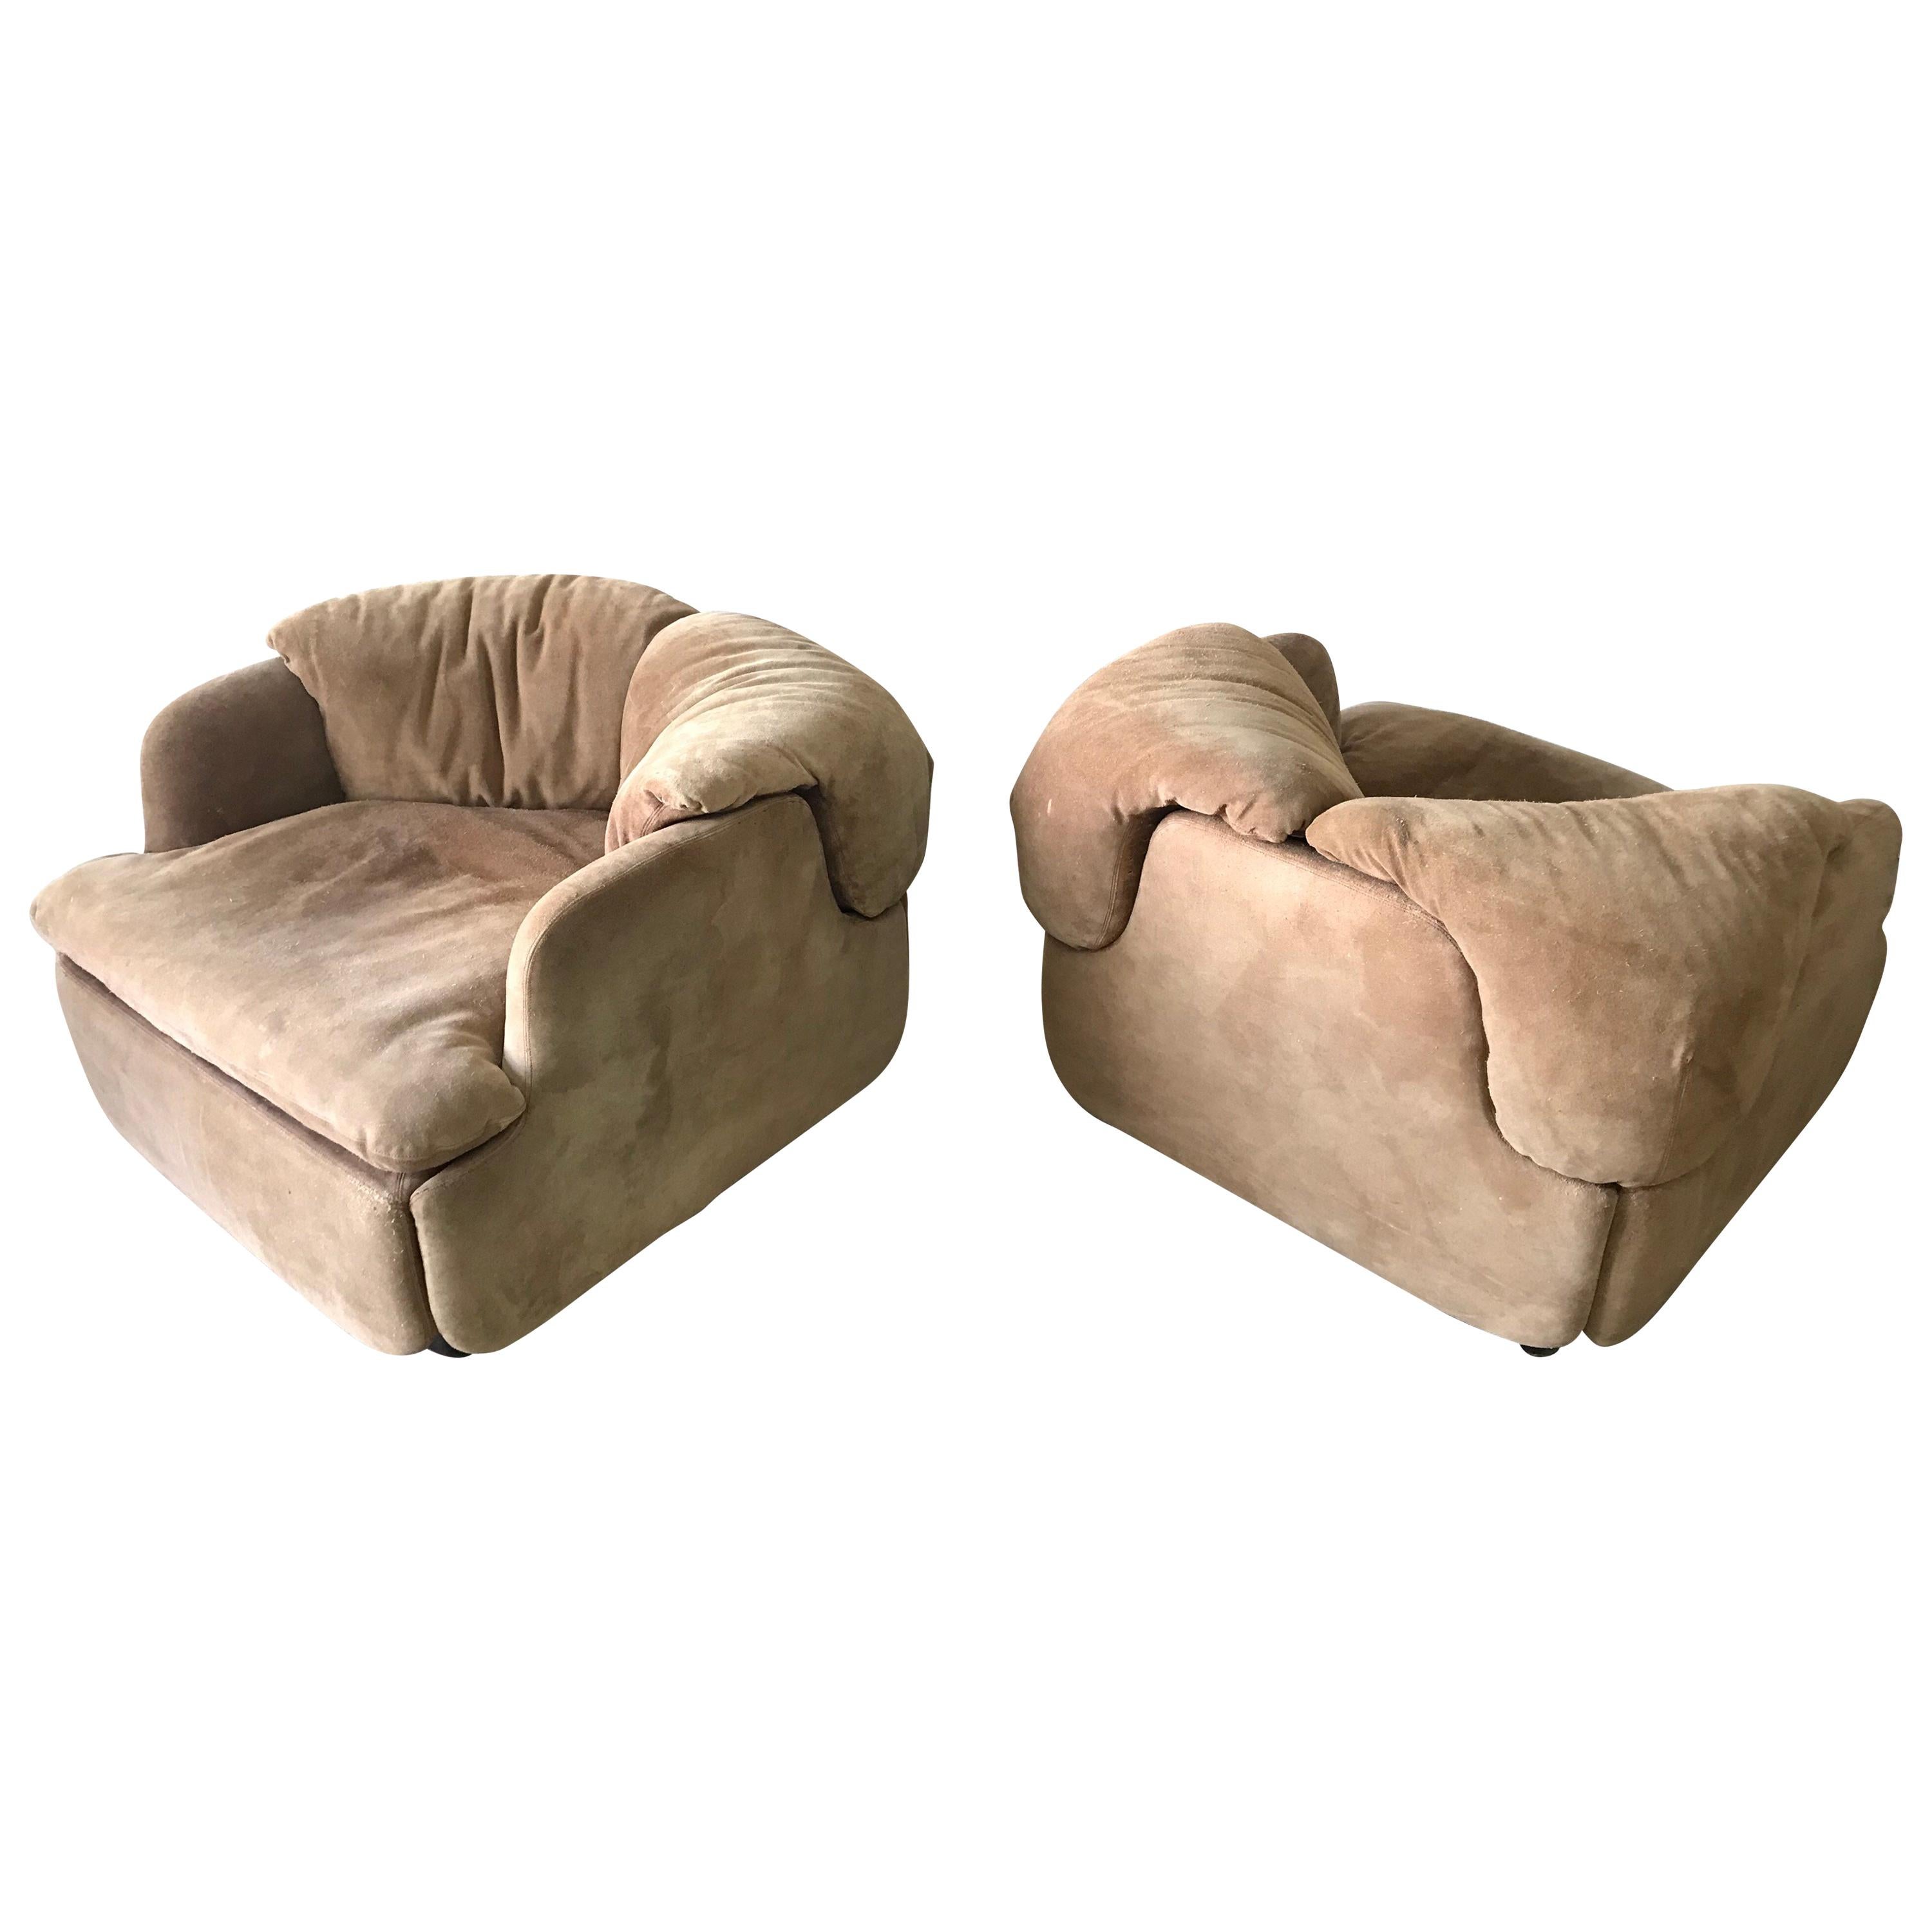 Rare Pair of Suede “Confidential” Armchairs or Club Chairs by Alberto Rosselli